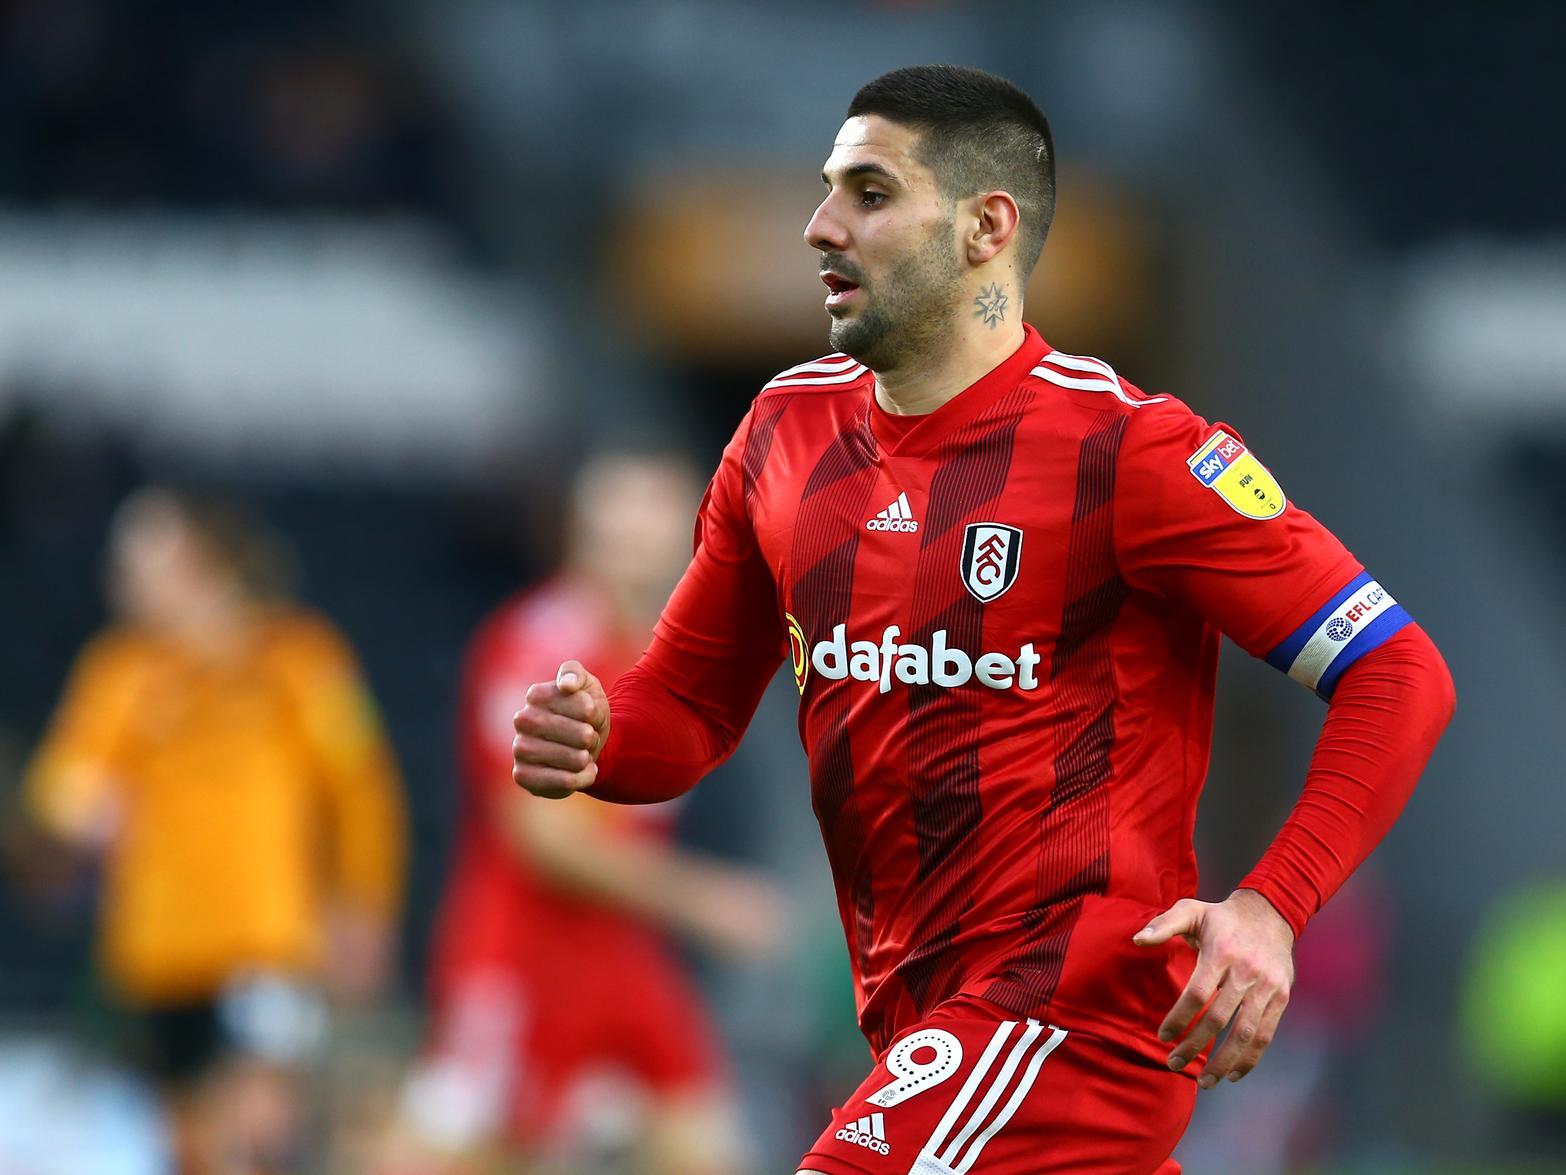 Fulham are said to have successfully rebuffed interest in their star striker Aleksander Mitrovic from Spurs, after slapping a huge 40 million price tag on the former Newcastle United man. (The 72)